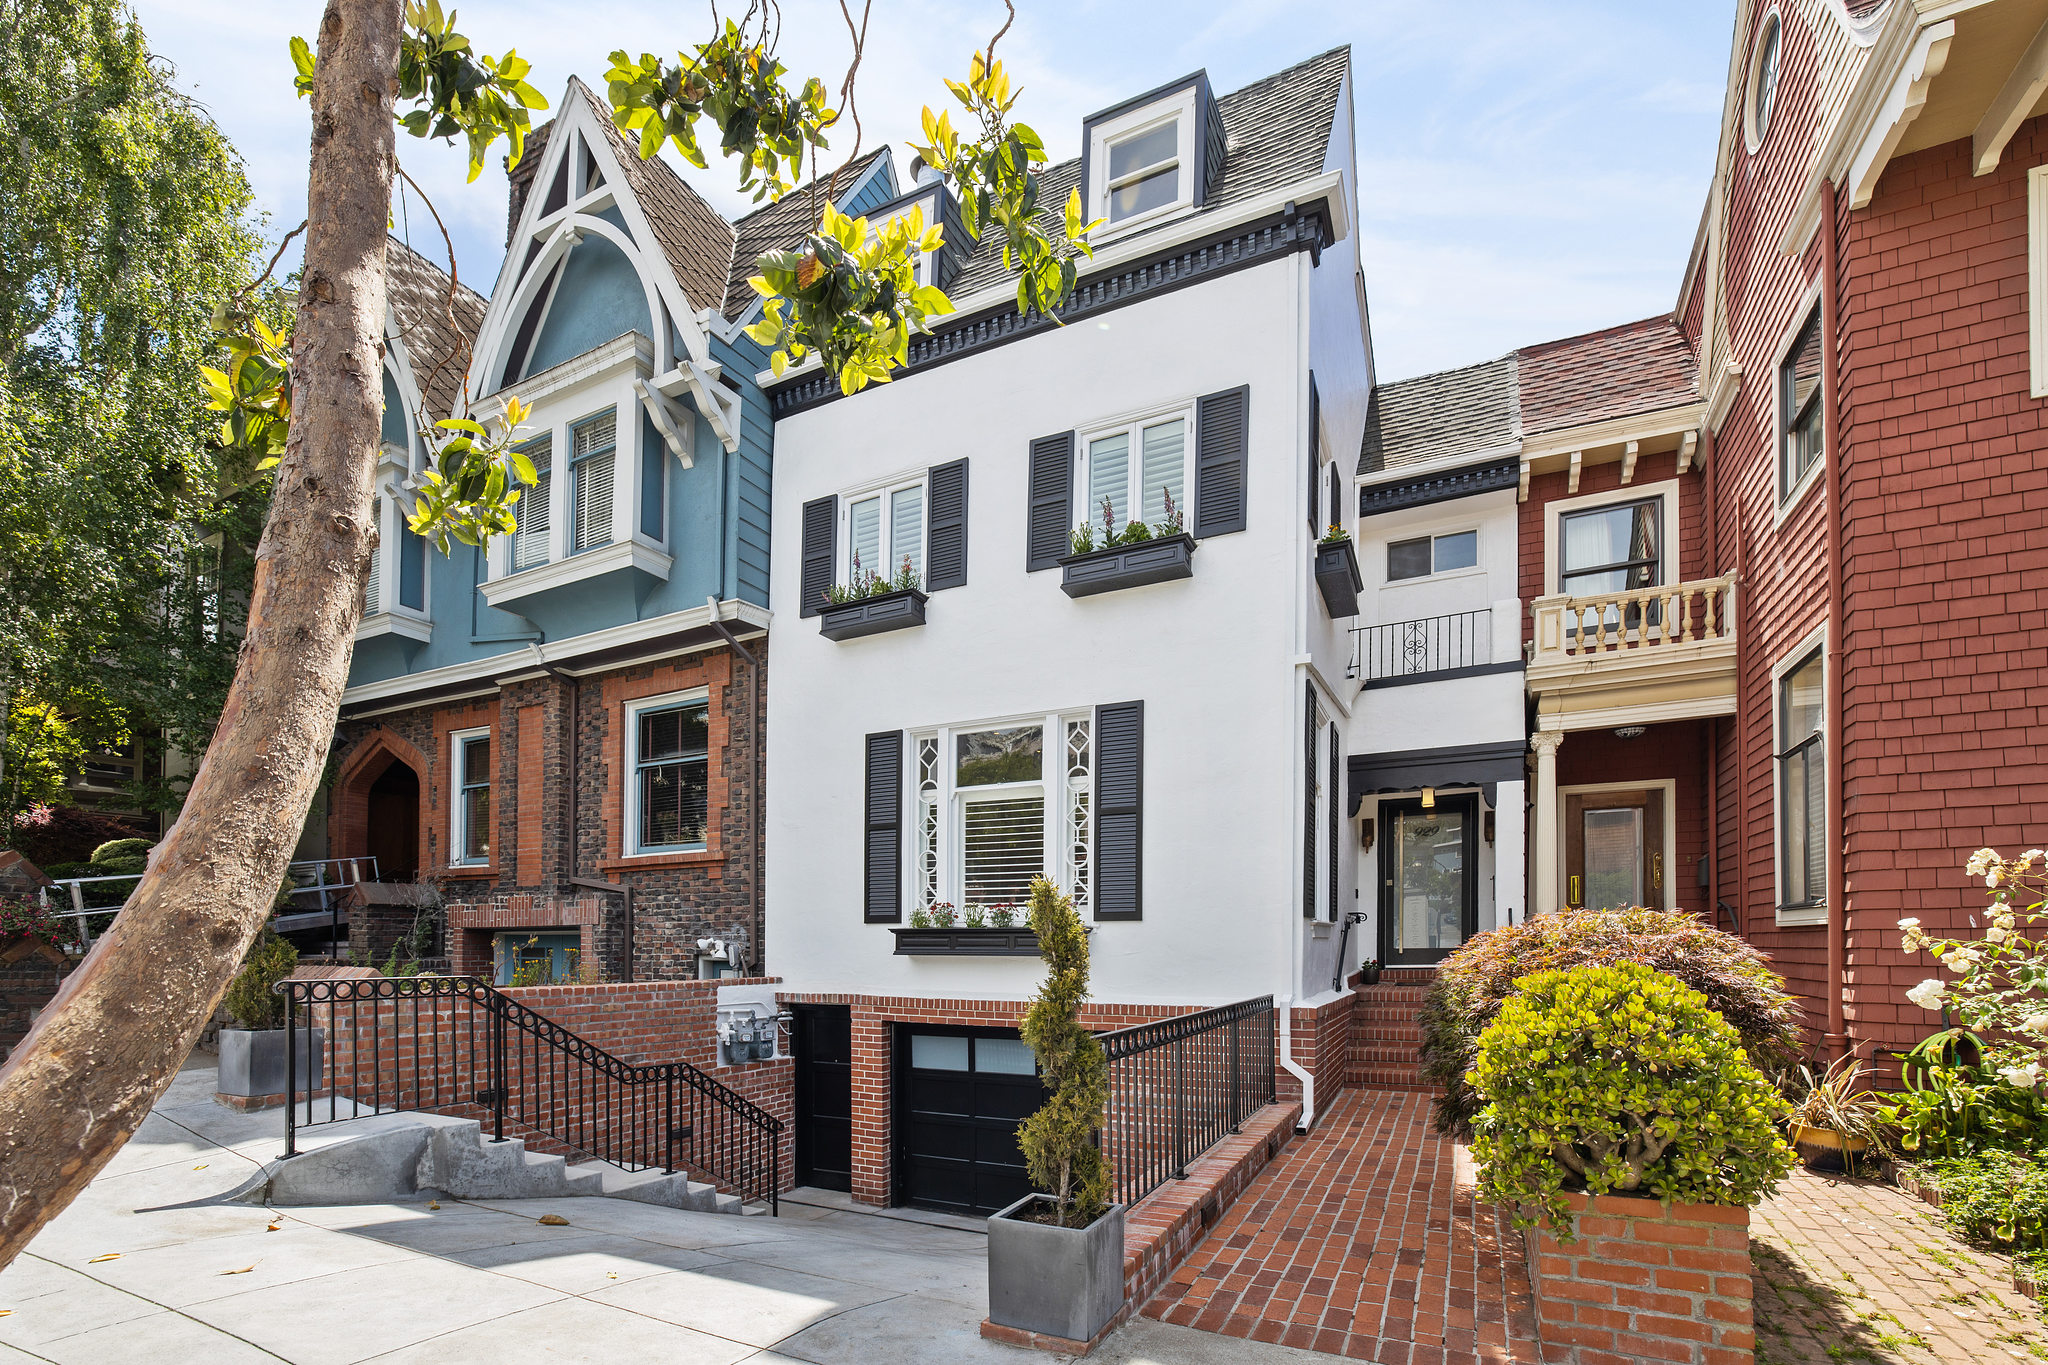 Property Photo: Front exterior view of 929 Ashbury Street, featuring a cheery white facade